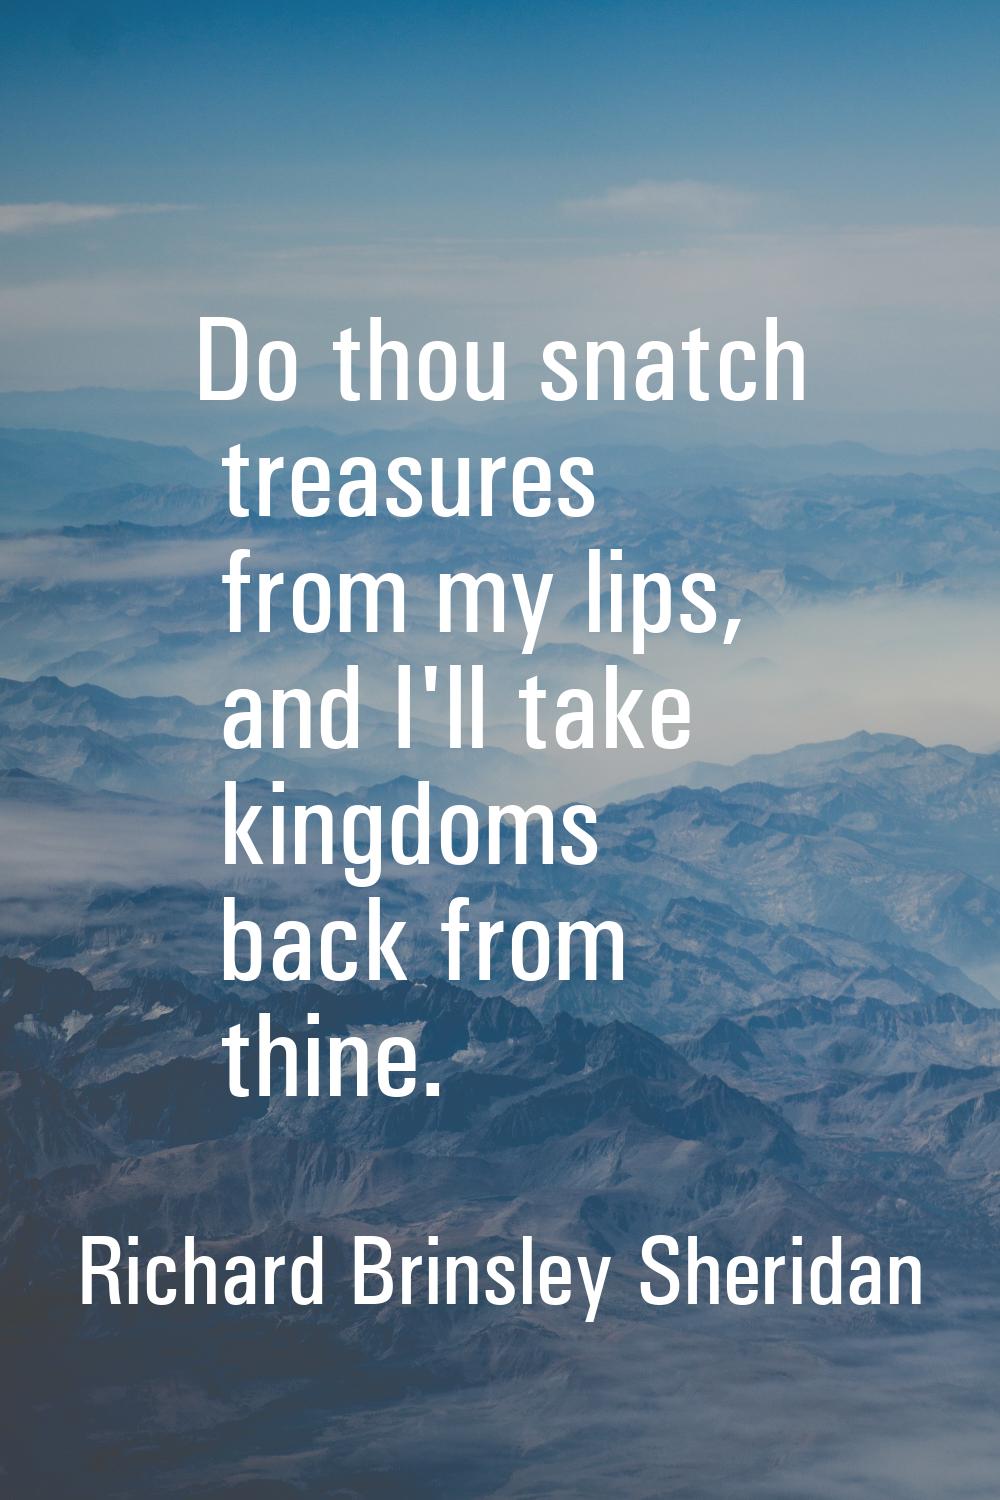 Do thou snatch treasures from my lips, and I'll take kingdoms back from thine.